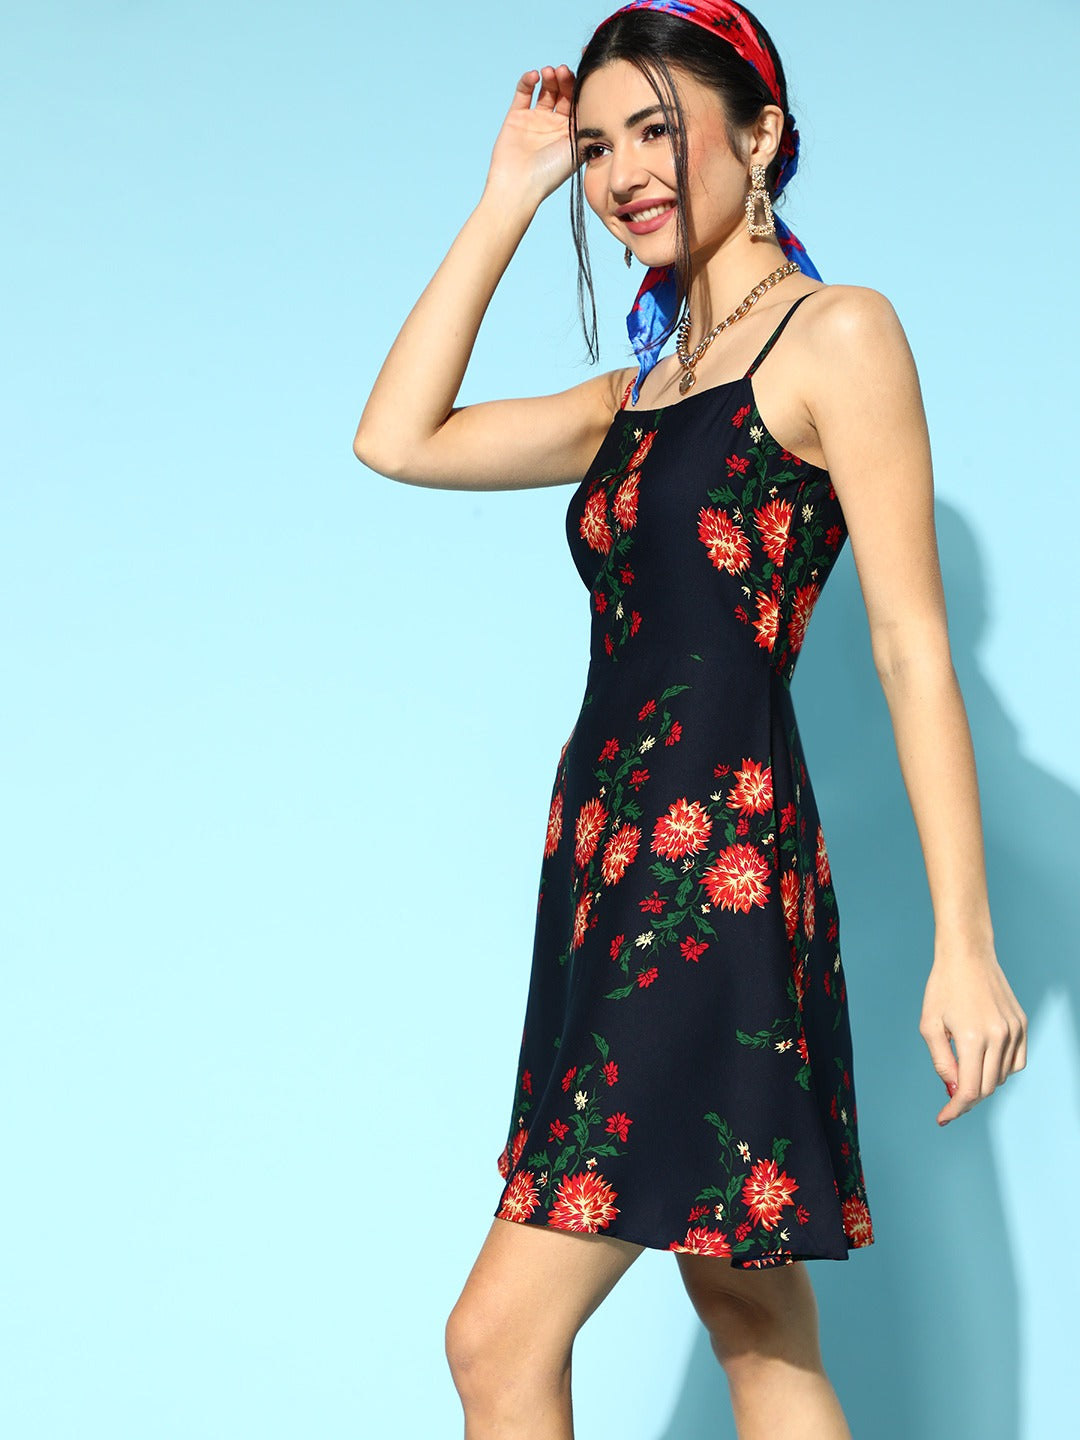 Berrylush Women Navy Blue & Red Floral Printed Square Neck Crepe Flared A-Line Mini Dress